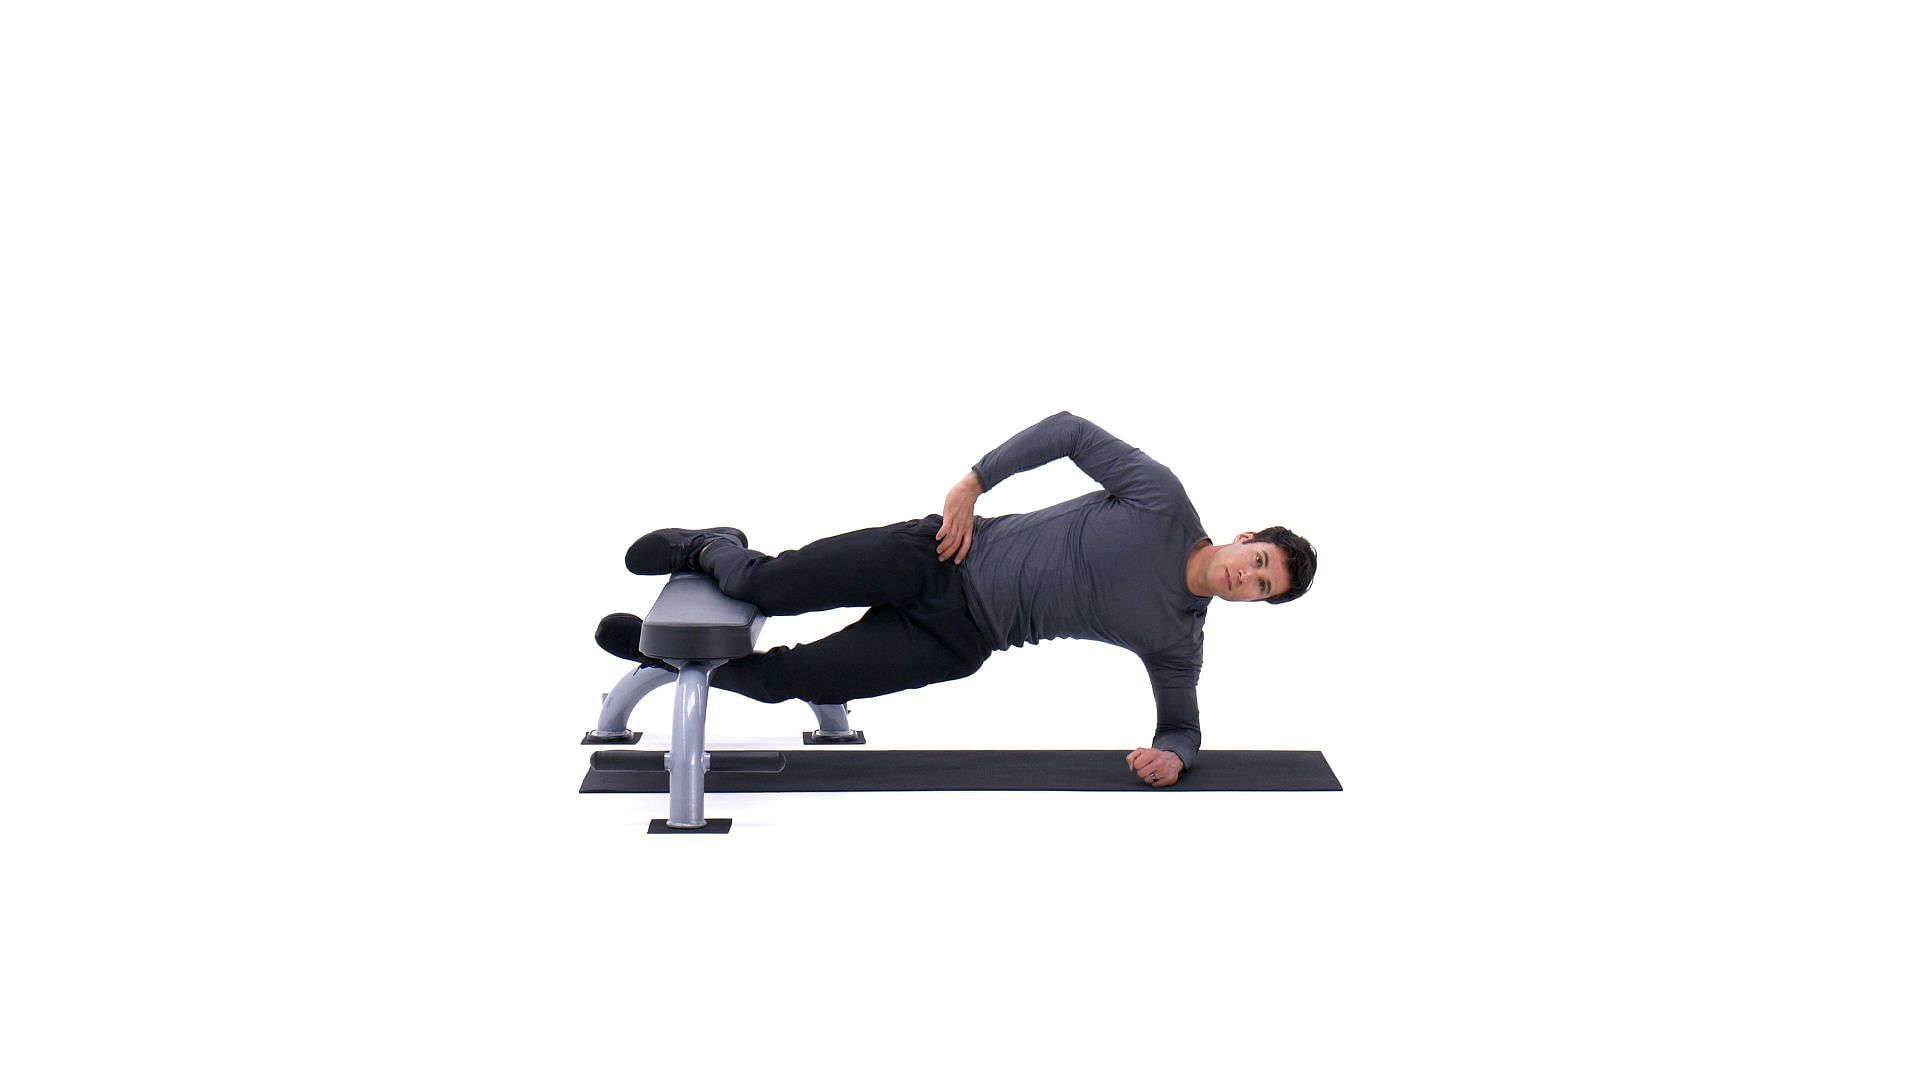 The main focus of this Plank exercise is on the core muscles, which encompass the rectus abdominis, transverse abdominis, obliques, and the muscles in the lower back. (Image via Bodybuilding,com)